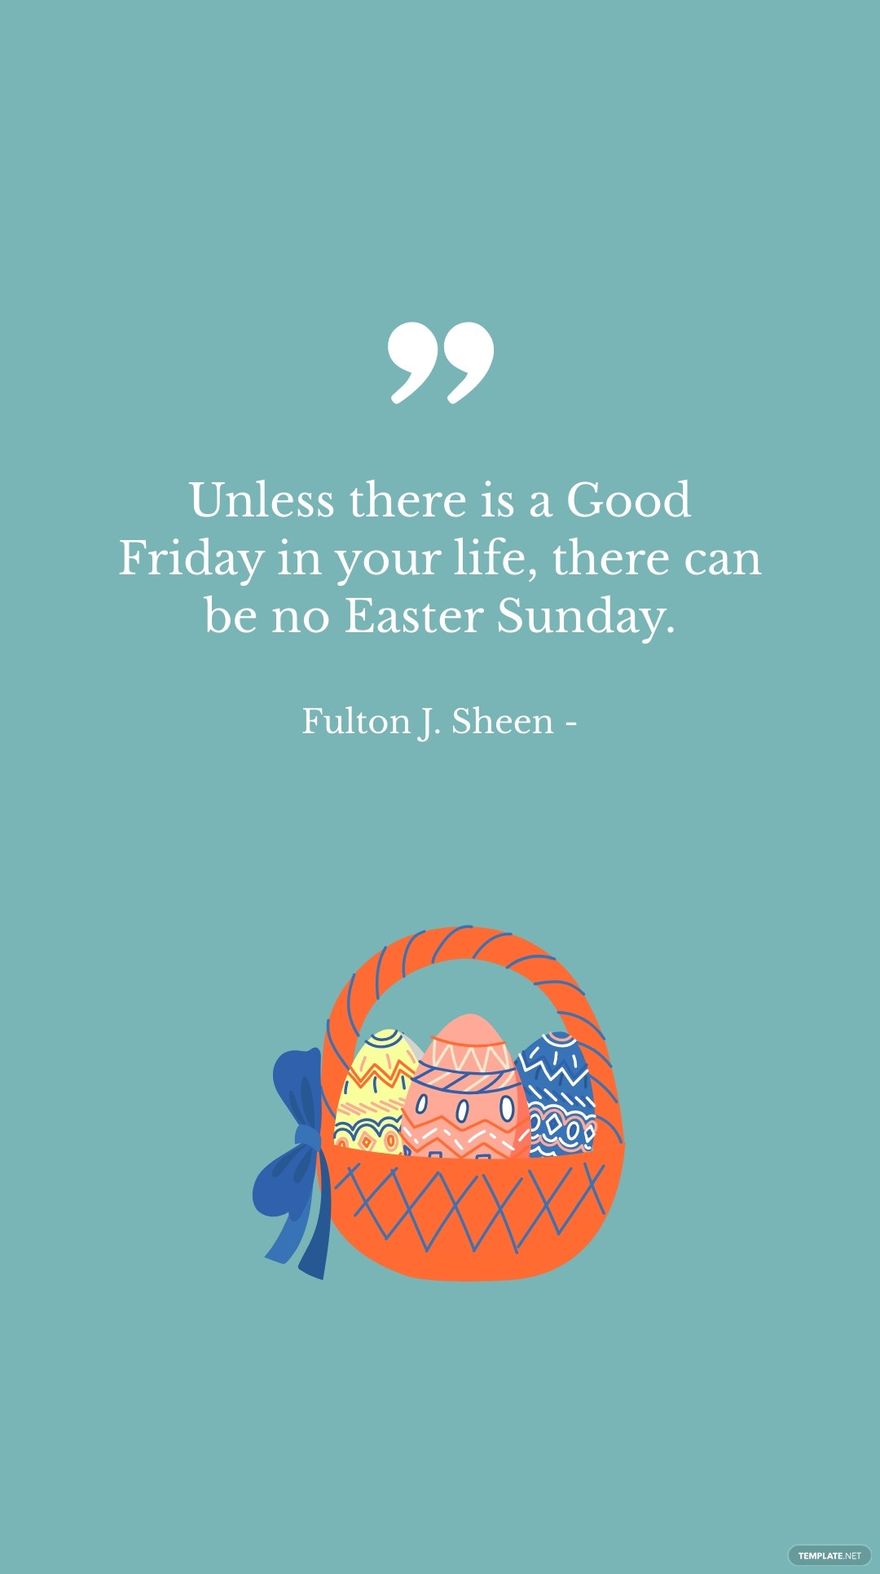 Fulton J. Sheen - Unless there is a Good Friday in your life, there can be no Easter Sunday.